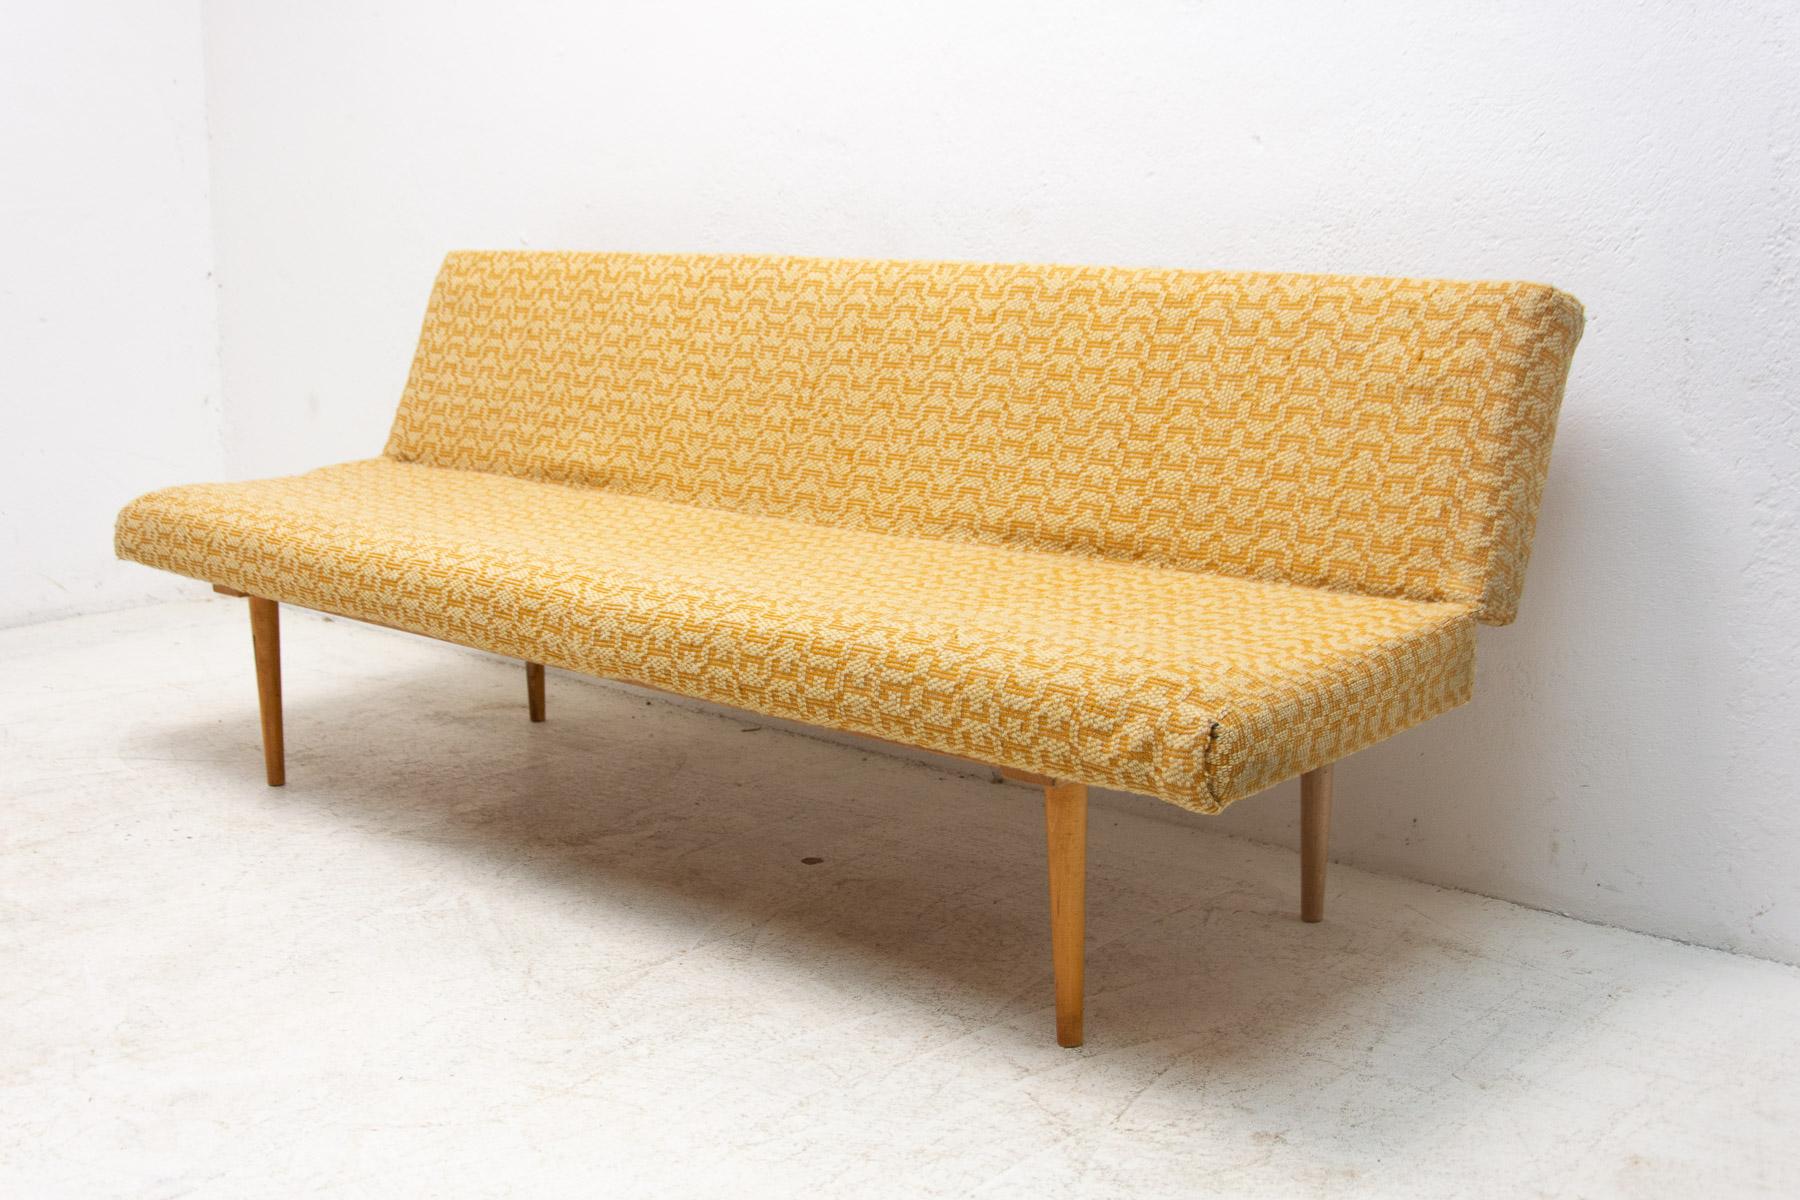 Mid-century sofa/daybed, made in the former Czechoslovakia in the 1960´s, designed by Miroslav Navrátil. Material: beech wood, fabric. The sofa is in well preserved Vintage condition, but shows signs of age and using.

Height: 72 cm

Lenght: 186